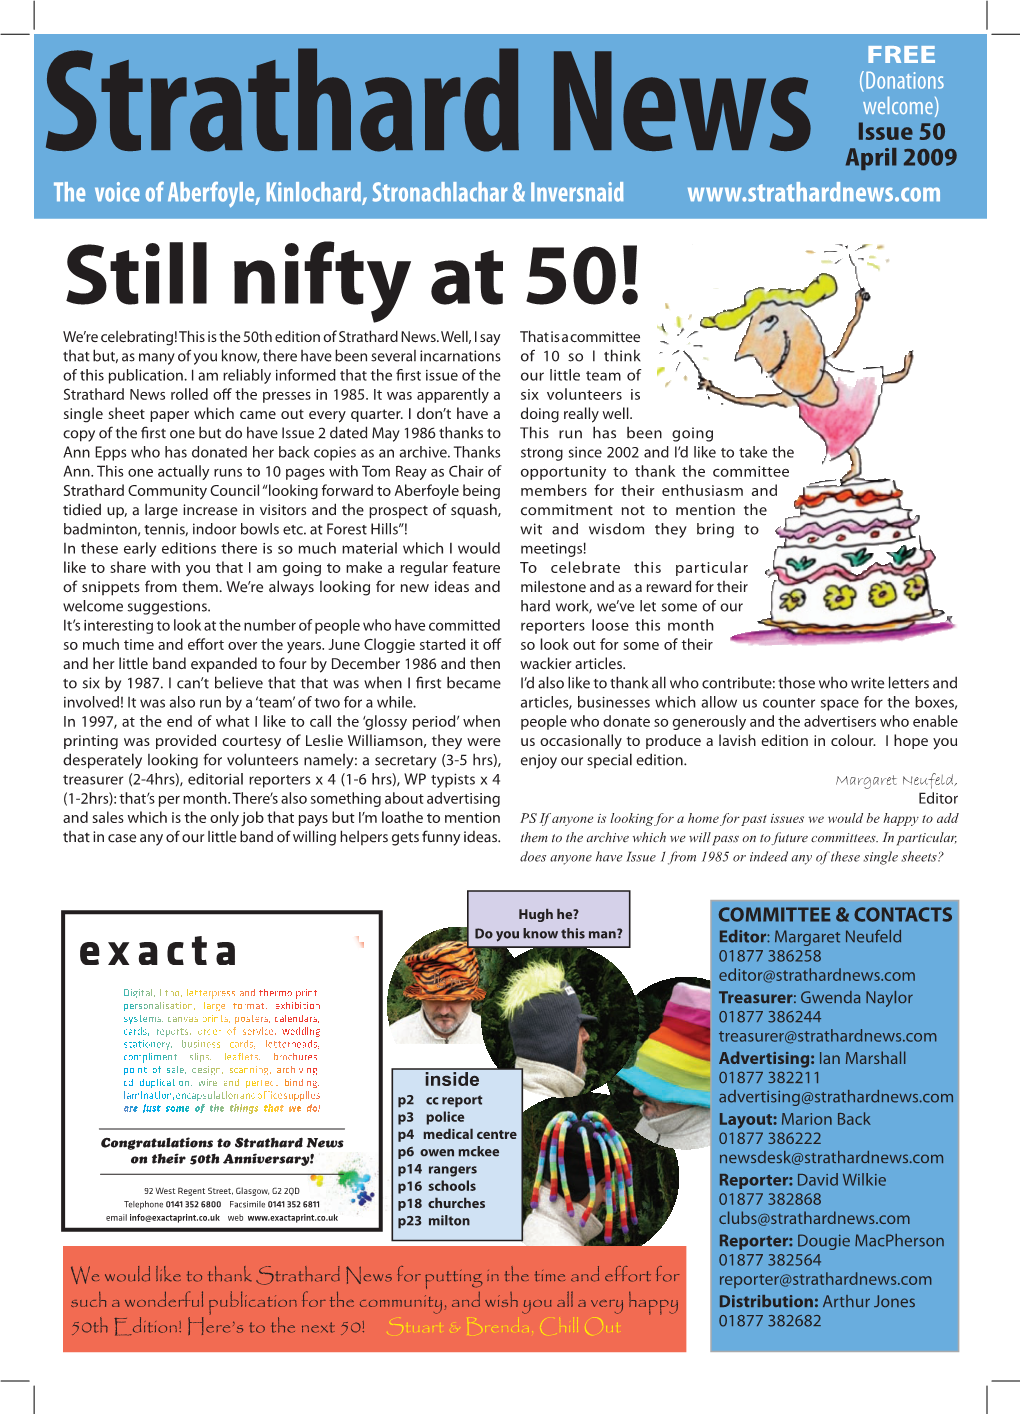 Still Nifty at 50! We’Re Celebrating! This Is the 50Th Edition of Strathard News